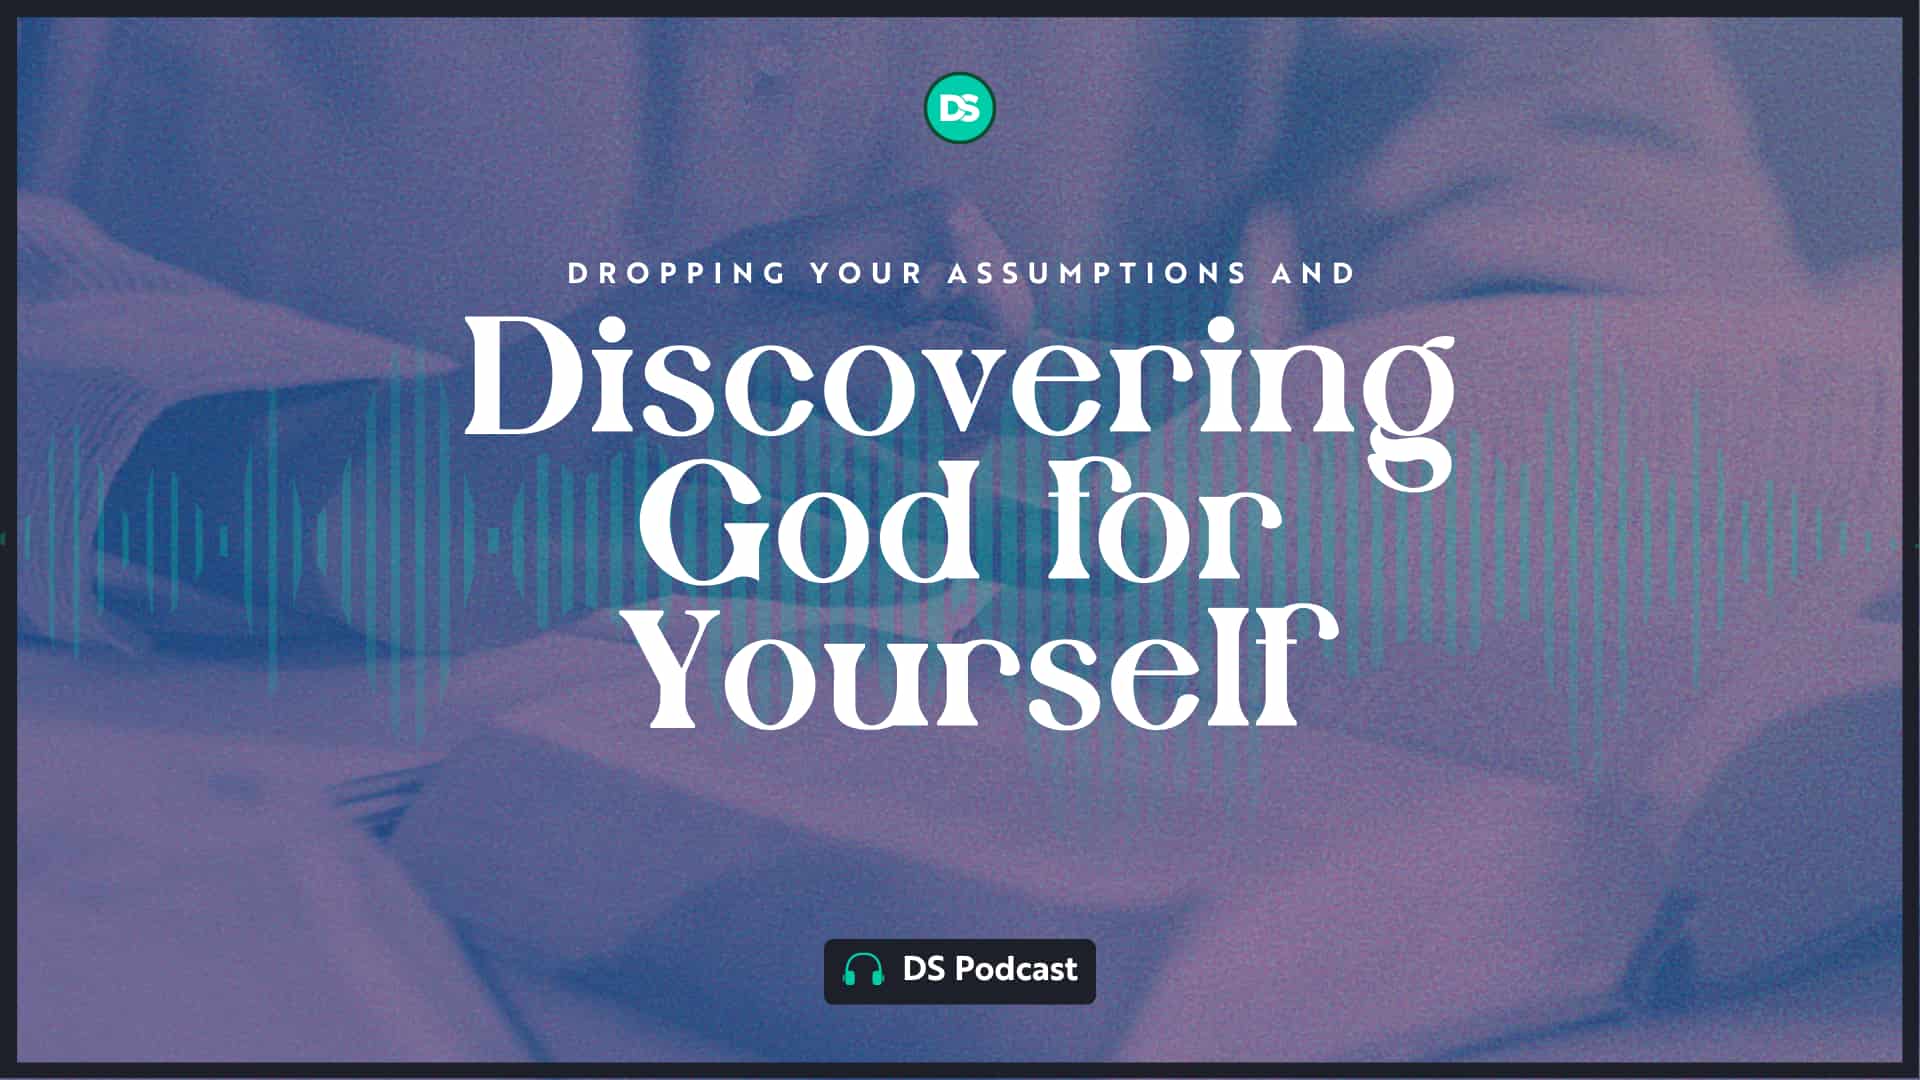 Dropping Your Assumptions and Discovering God for Yourself 19